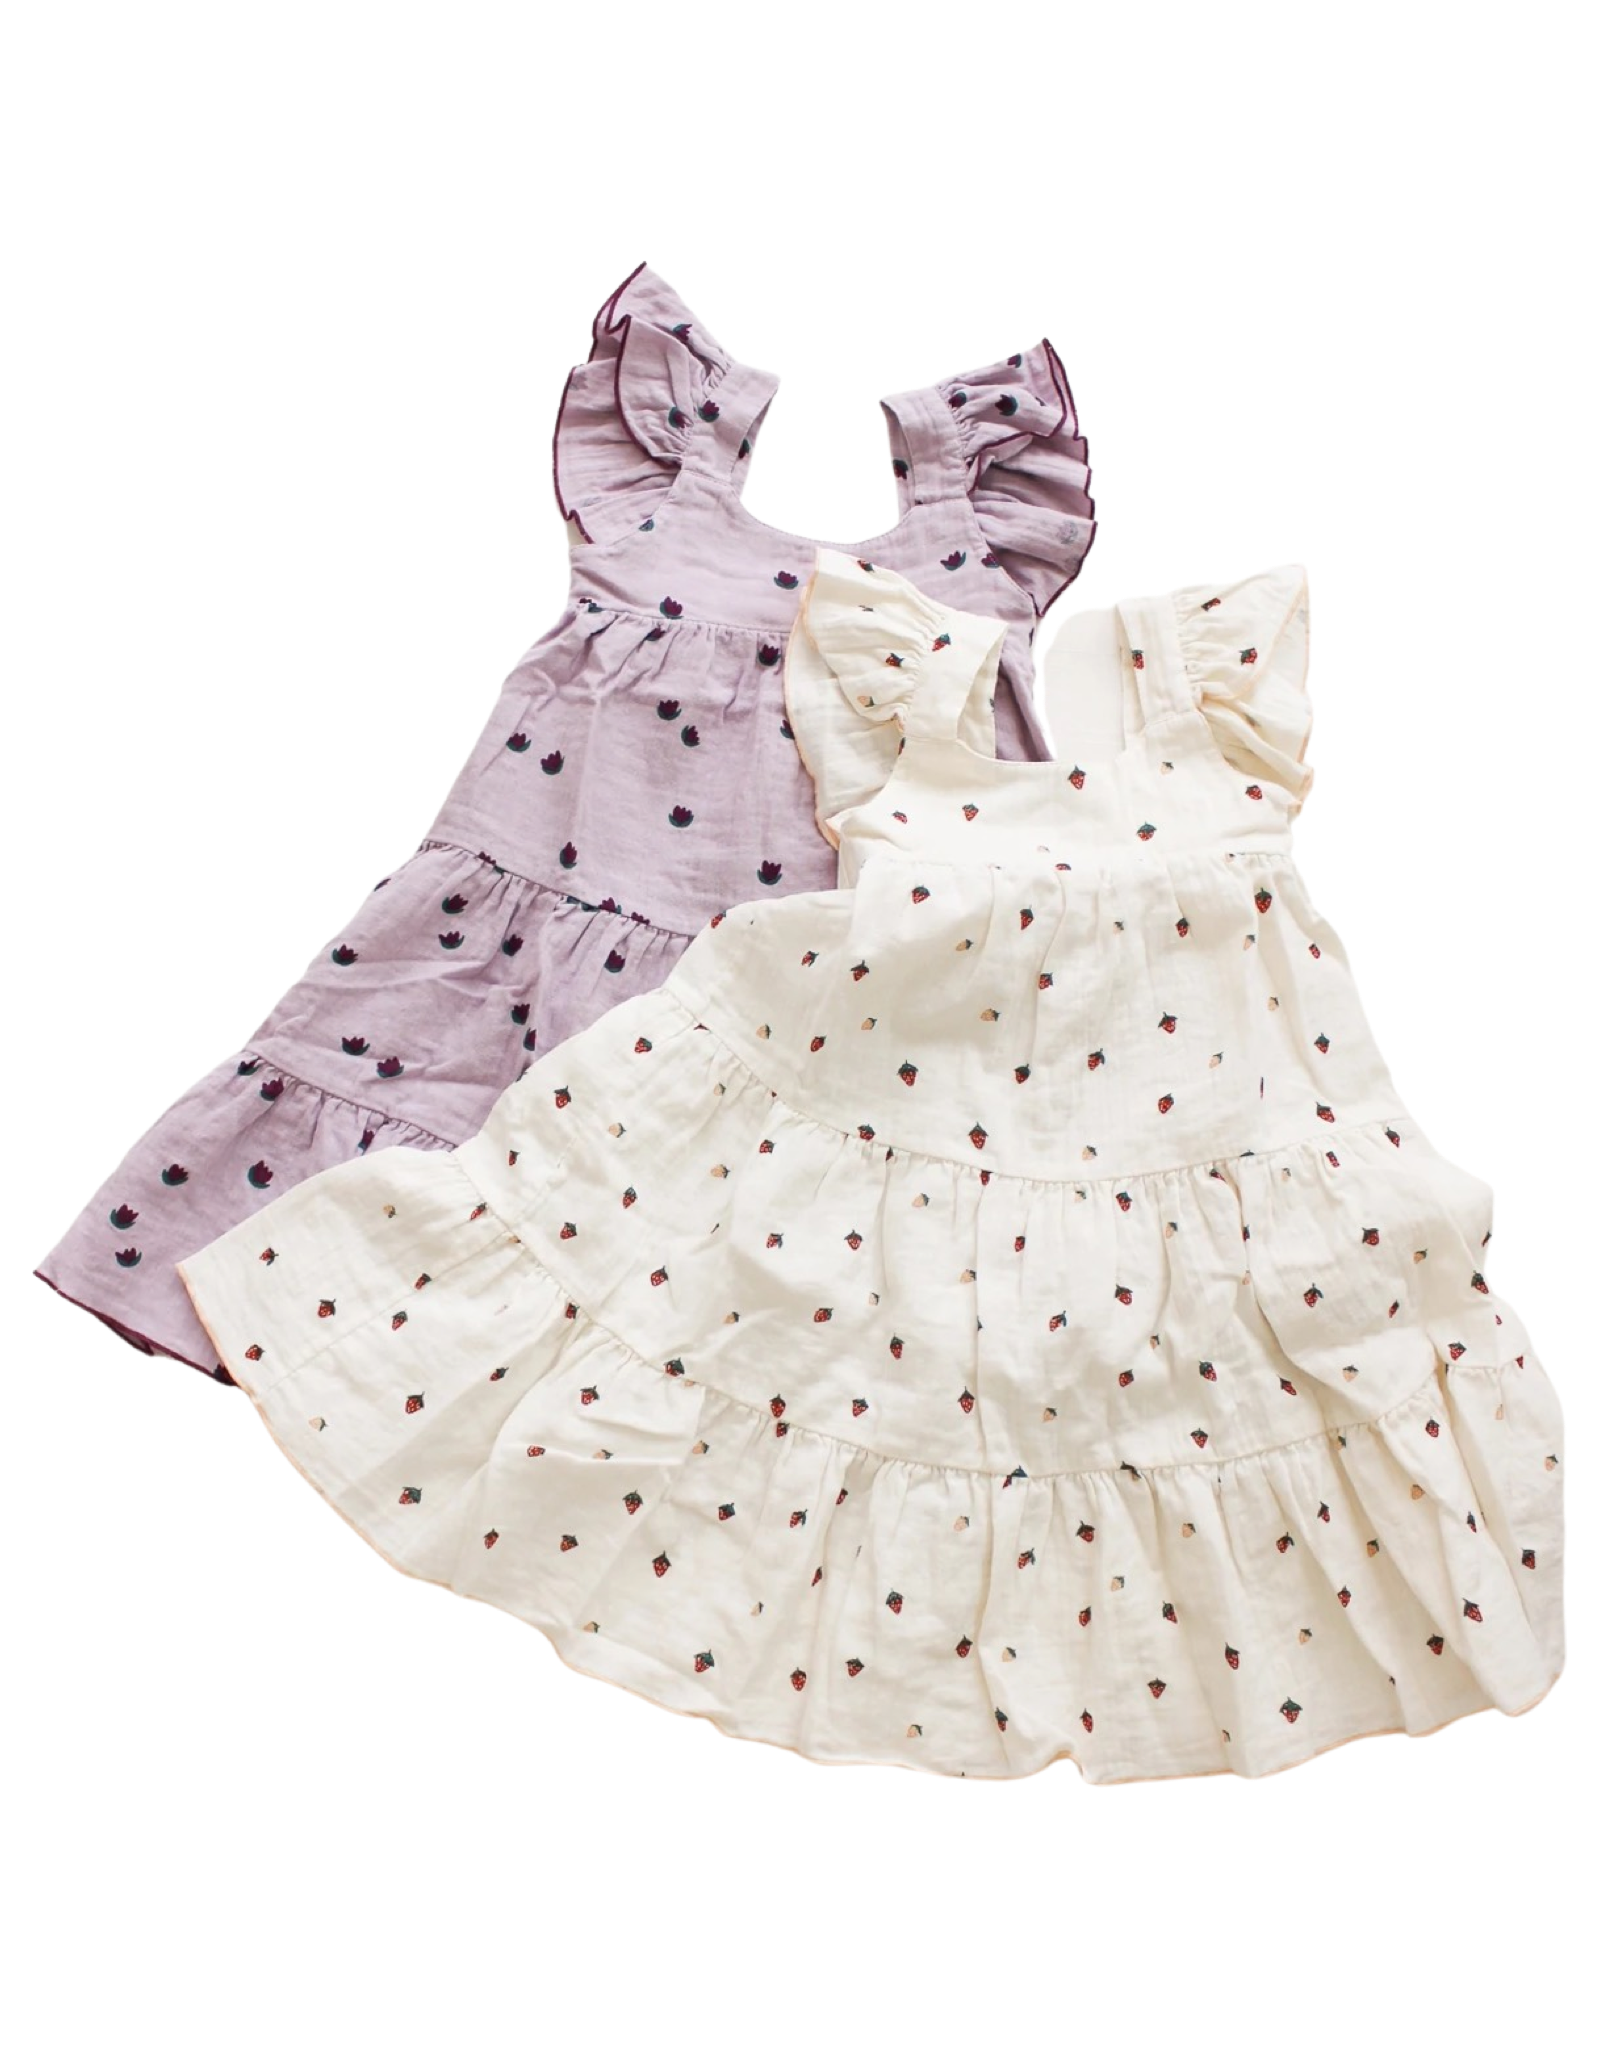 Fin & Vince Tulips tiered dress